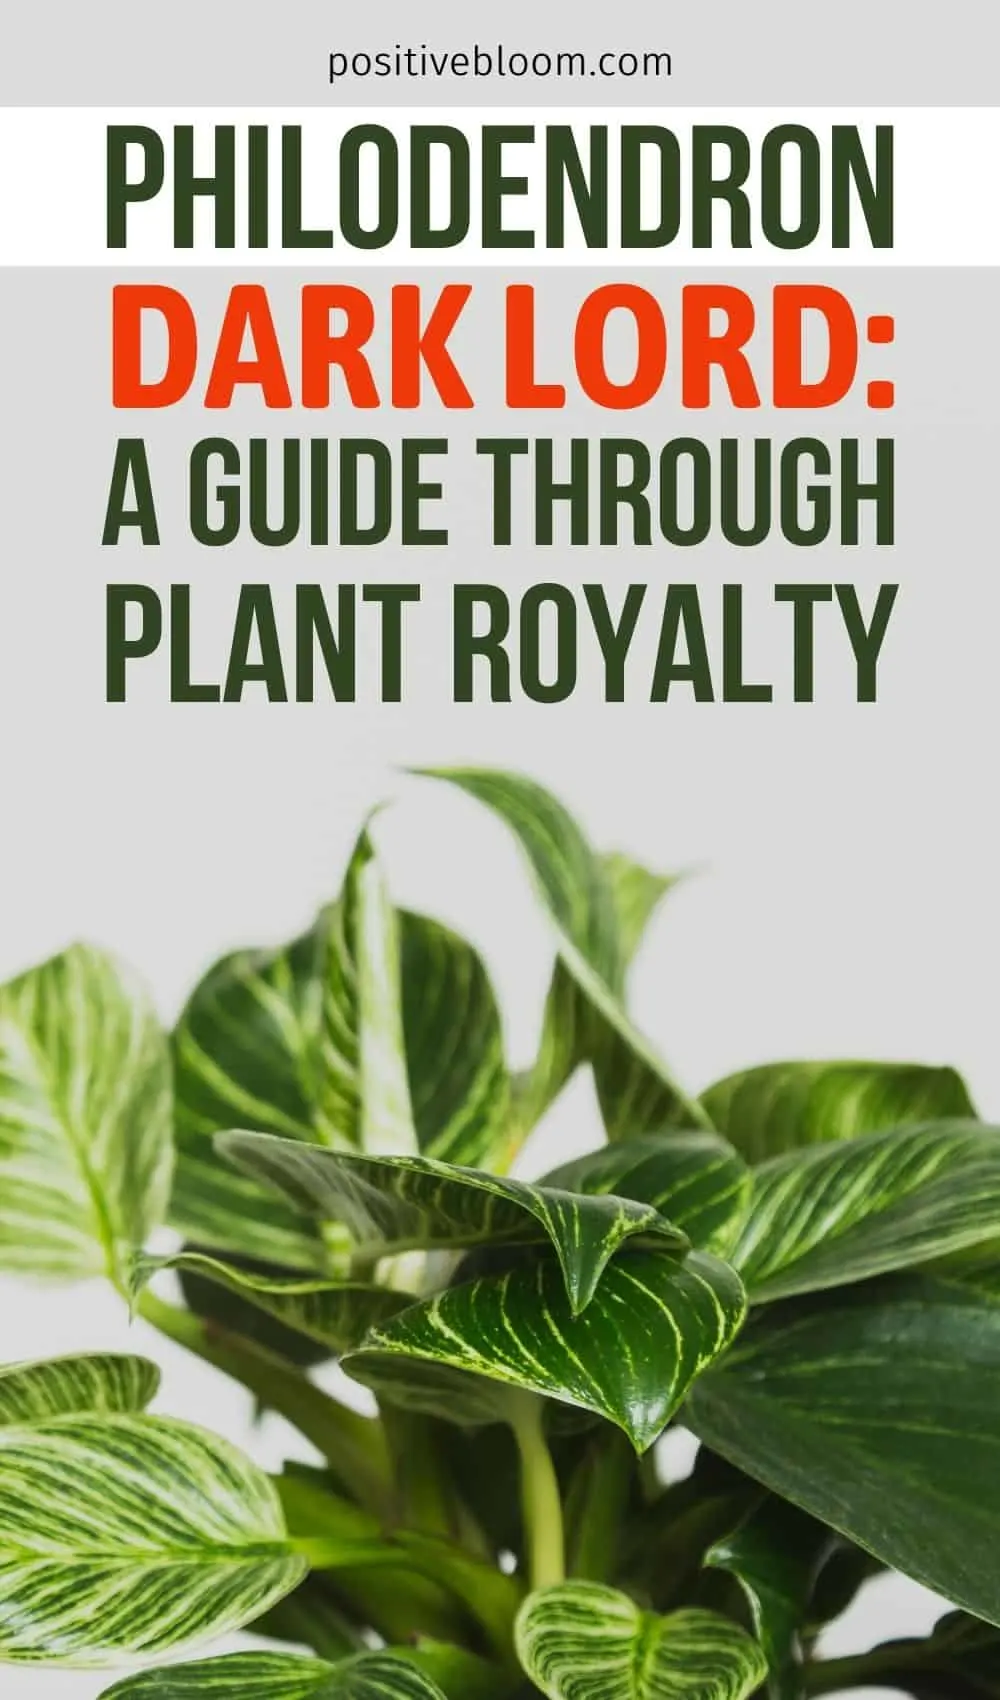 Philodendron Dark Lord: A Guide Through Plant Royalty Pinterest